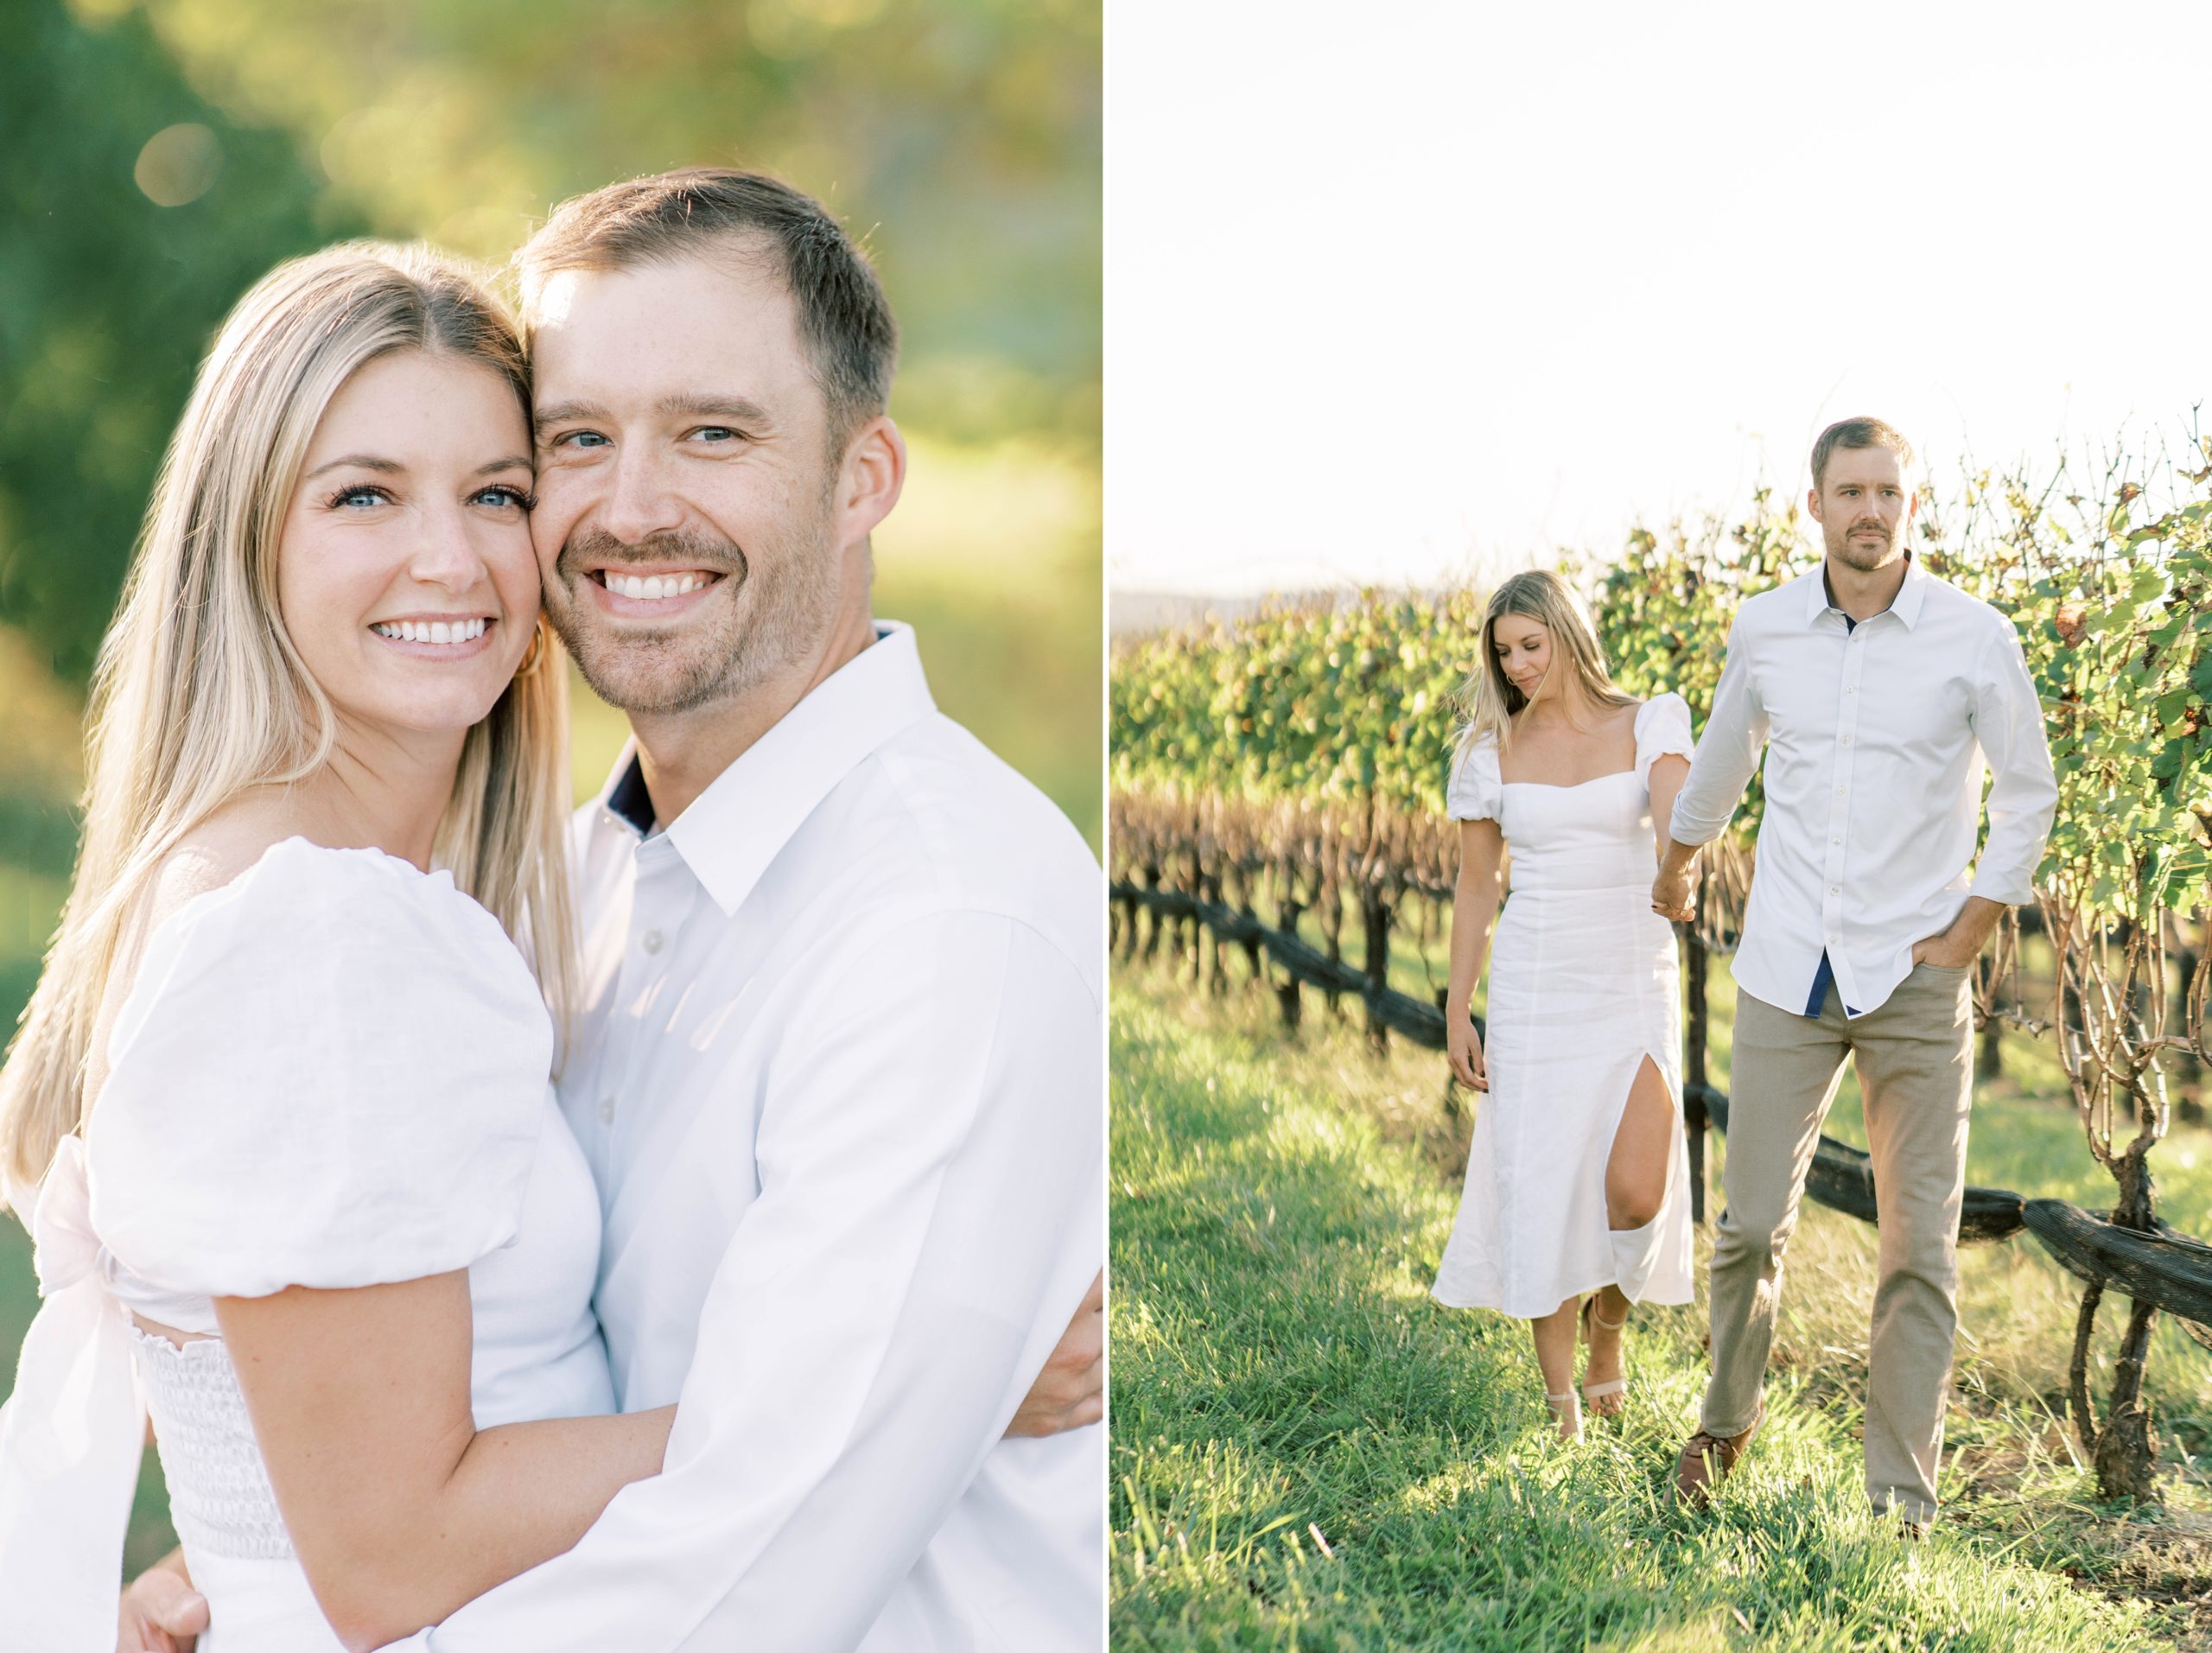 A golden hour engagement session at one of Virginia's most stunning vineyards, Stone Tower Winery, in Leesburg, VA.